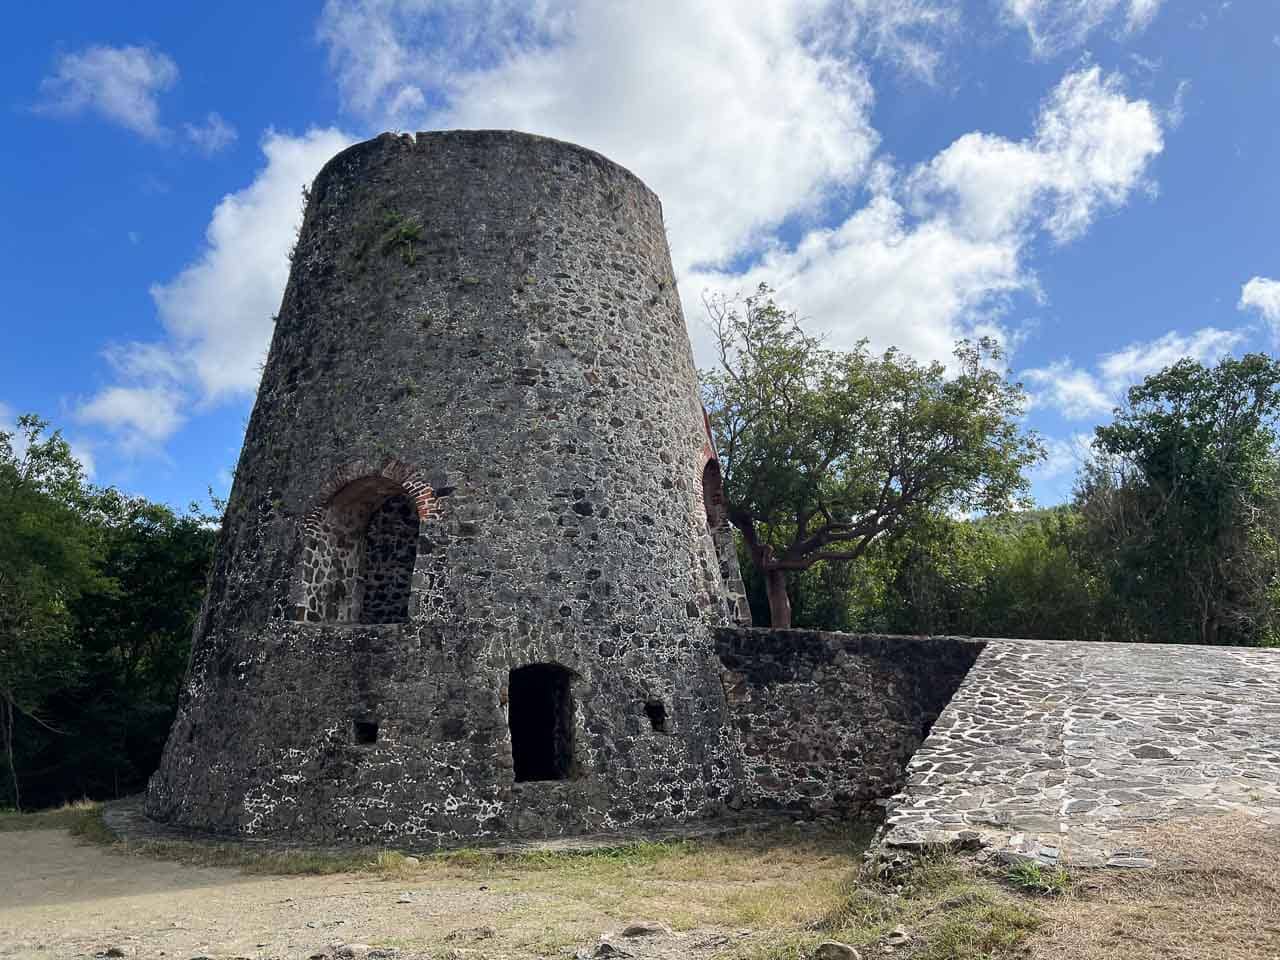 Ruins of a windmill at Catherineberg Sugar Mill in Virgin Islands National Park